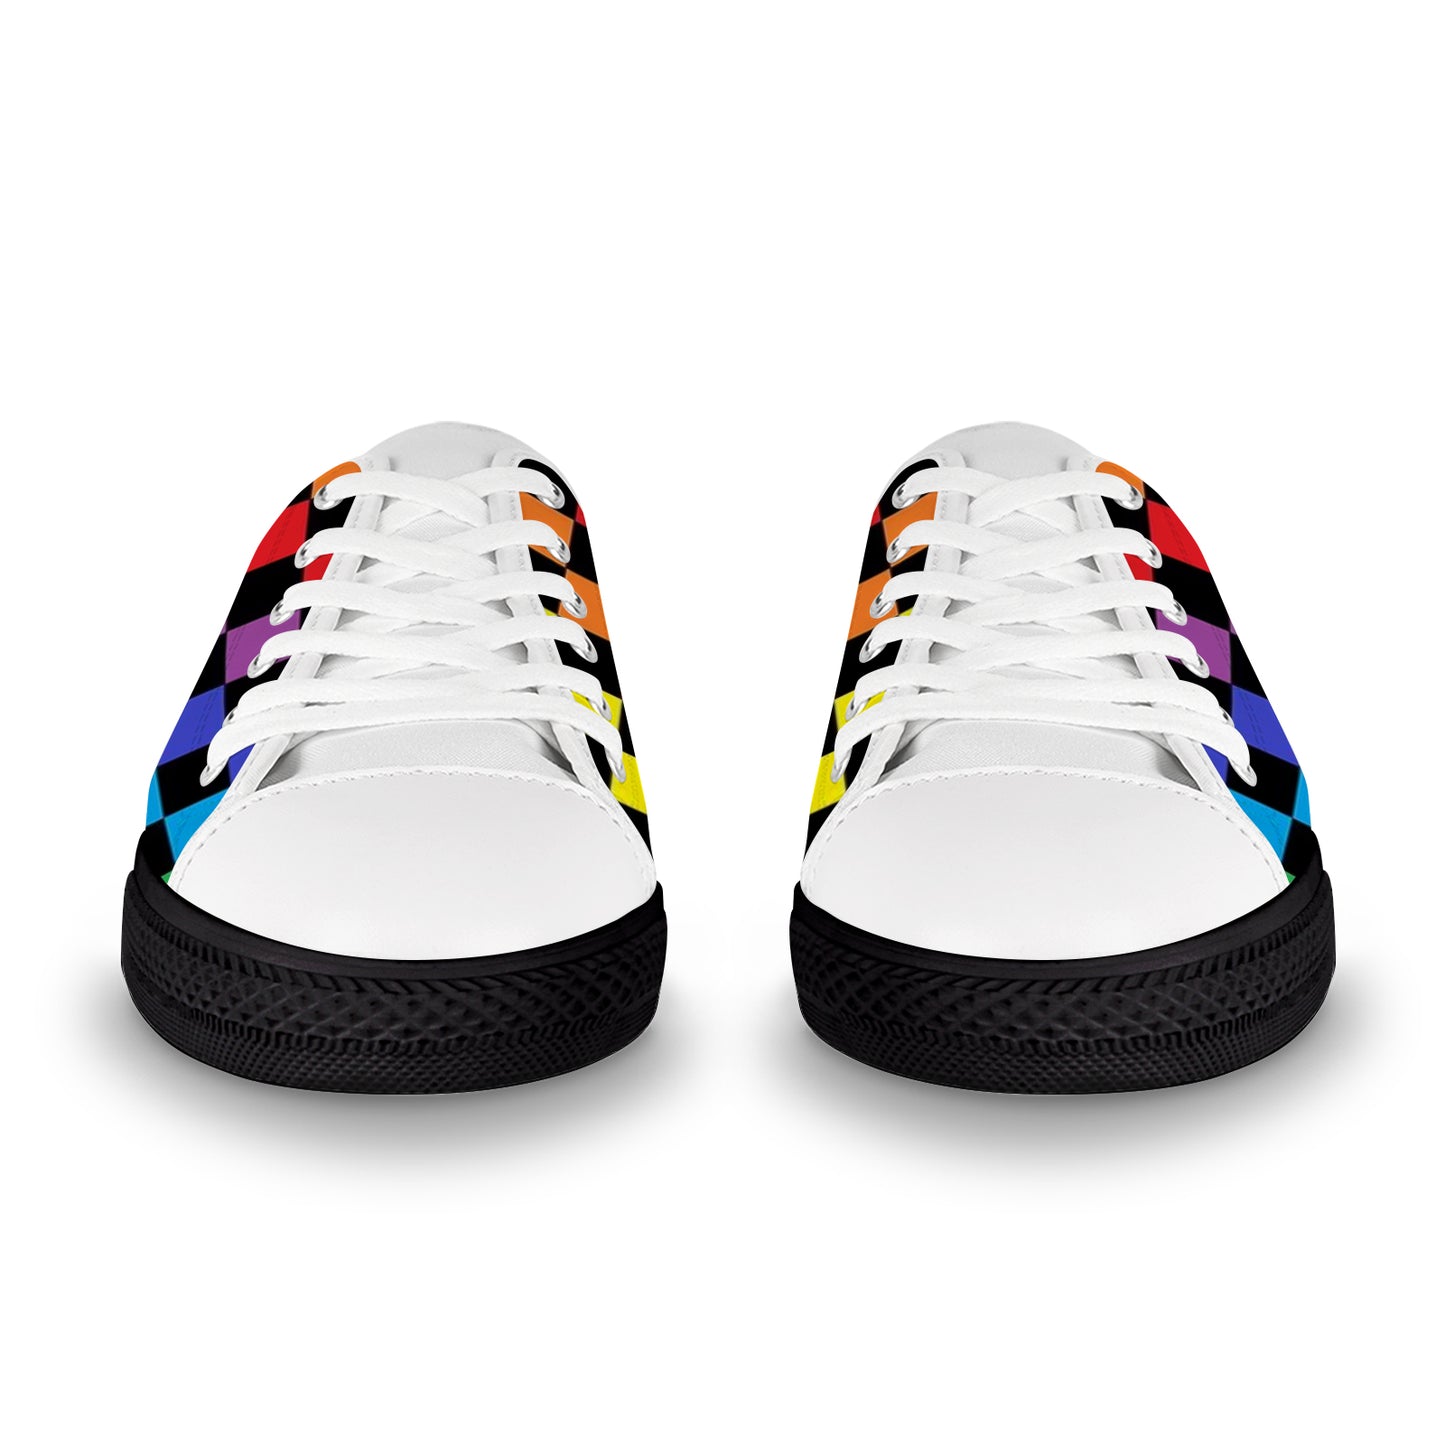 Women's Canvas Sneakers - Rainbow Checkered